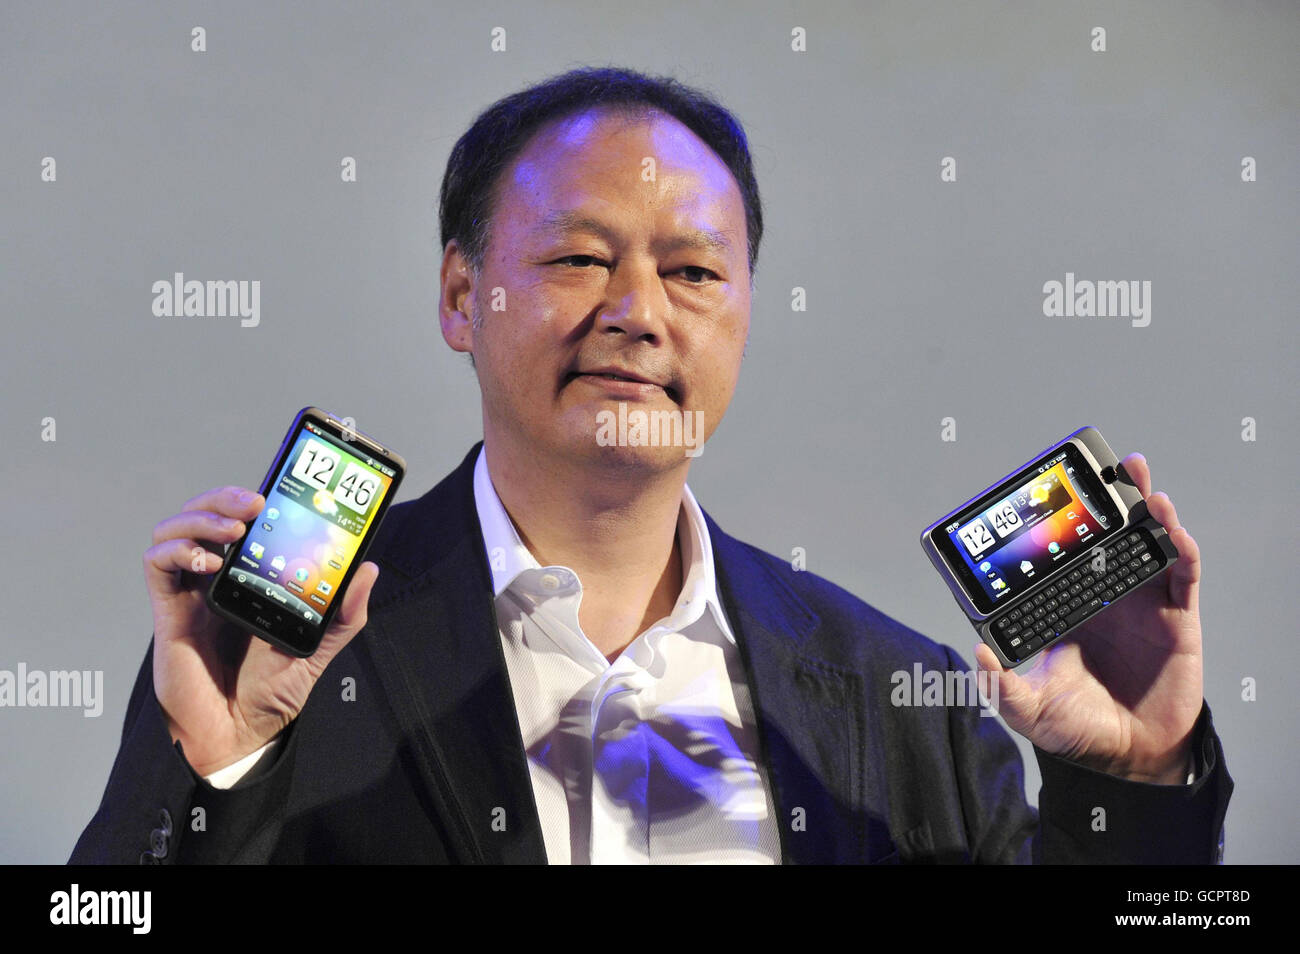 Peter Chow, Chief Executive Officer of mobile phone company HTC, unveils  the HTC Sense experience with the new HTC Desire HD (left) and HTC Desire Z  smartphones, at Old Billingsgate Market in